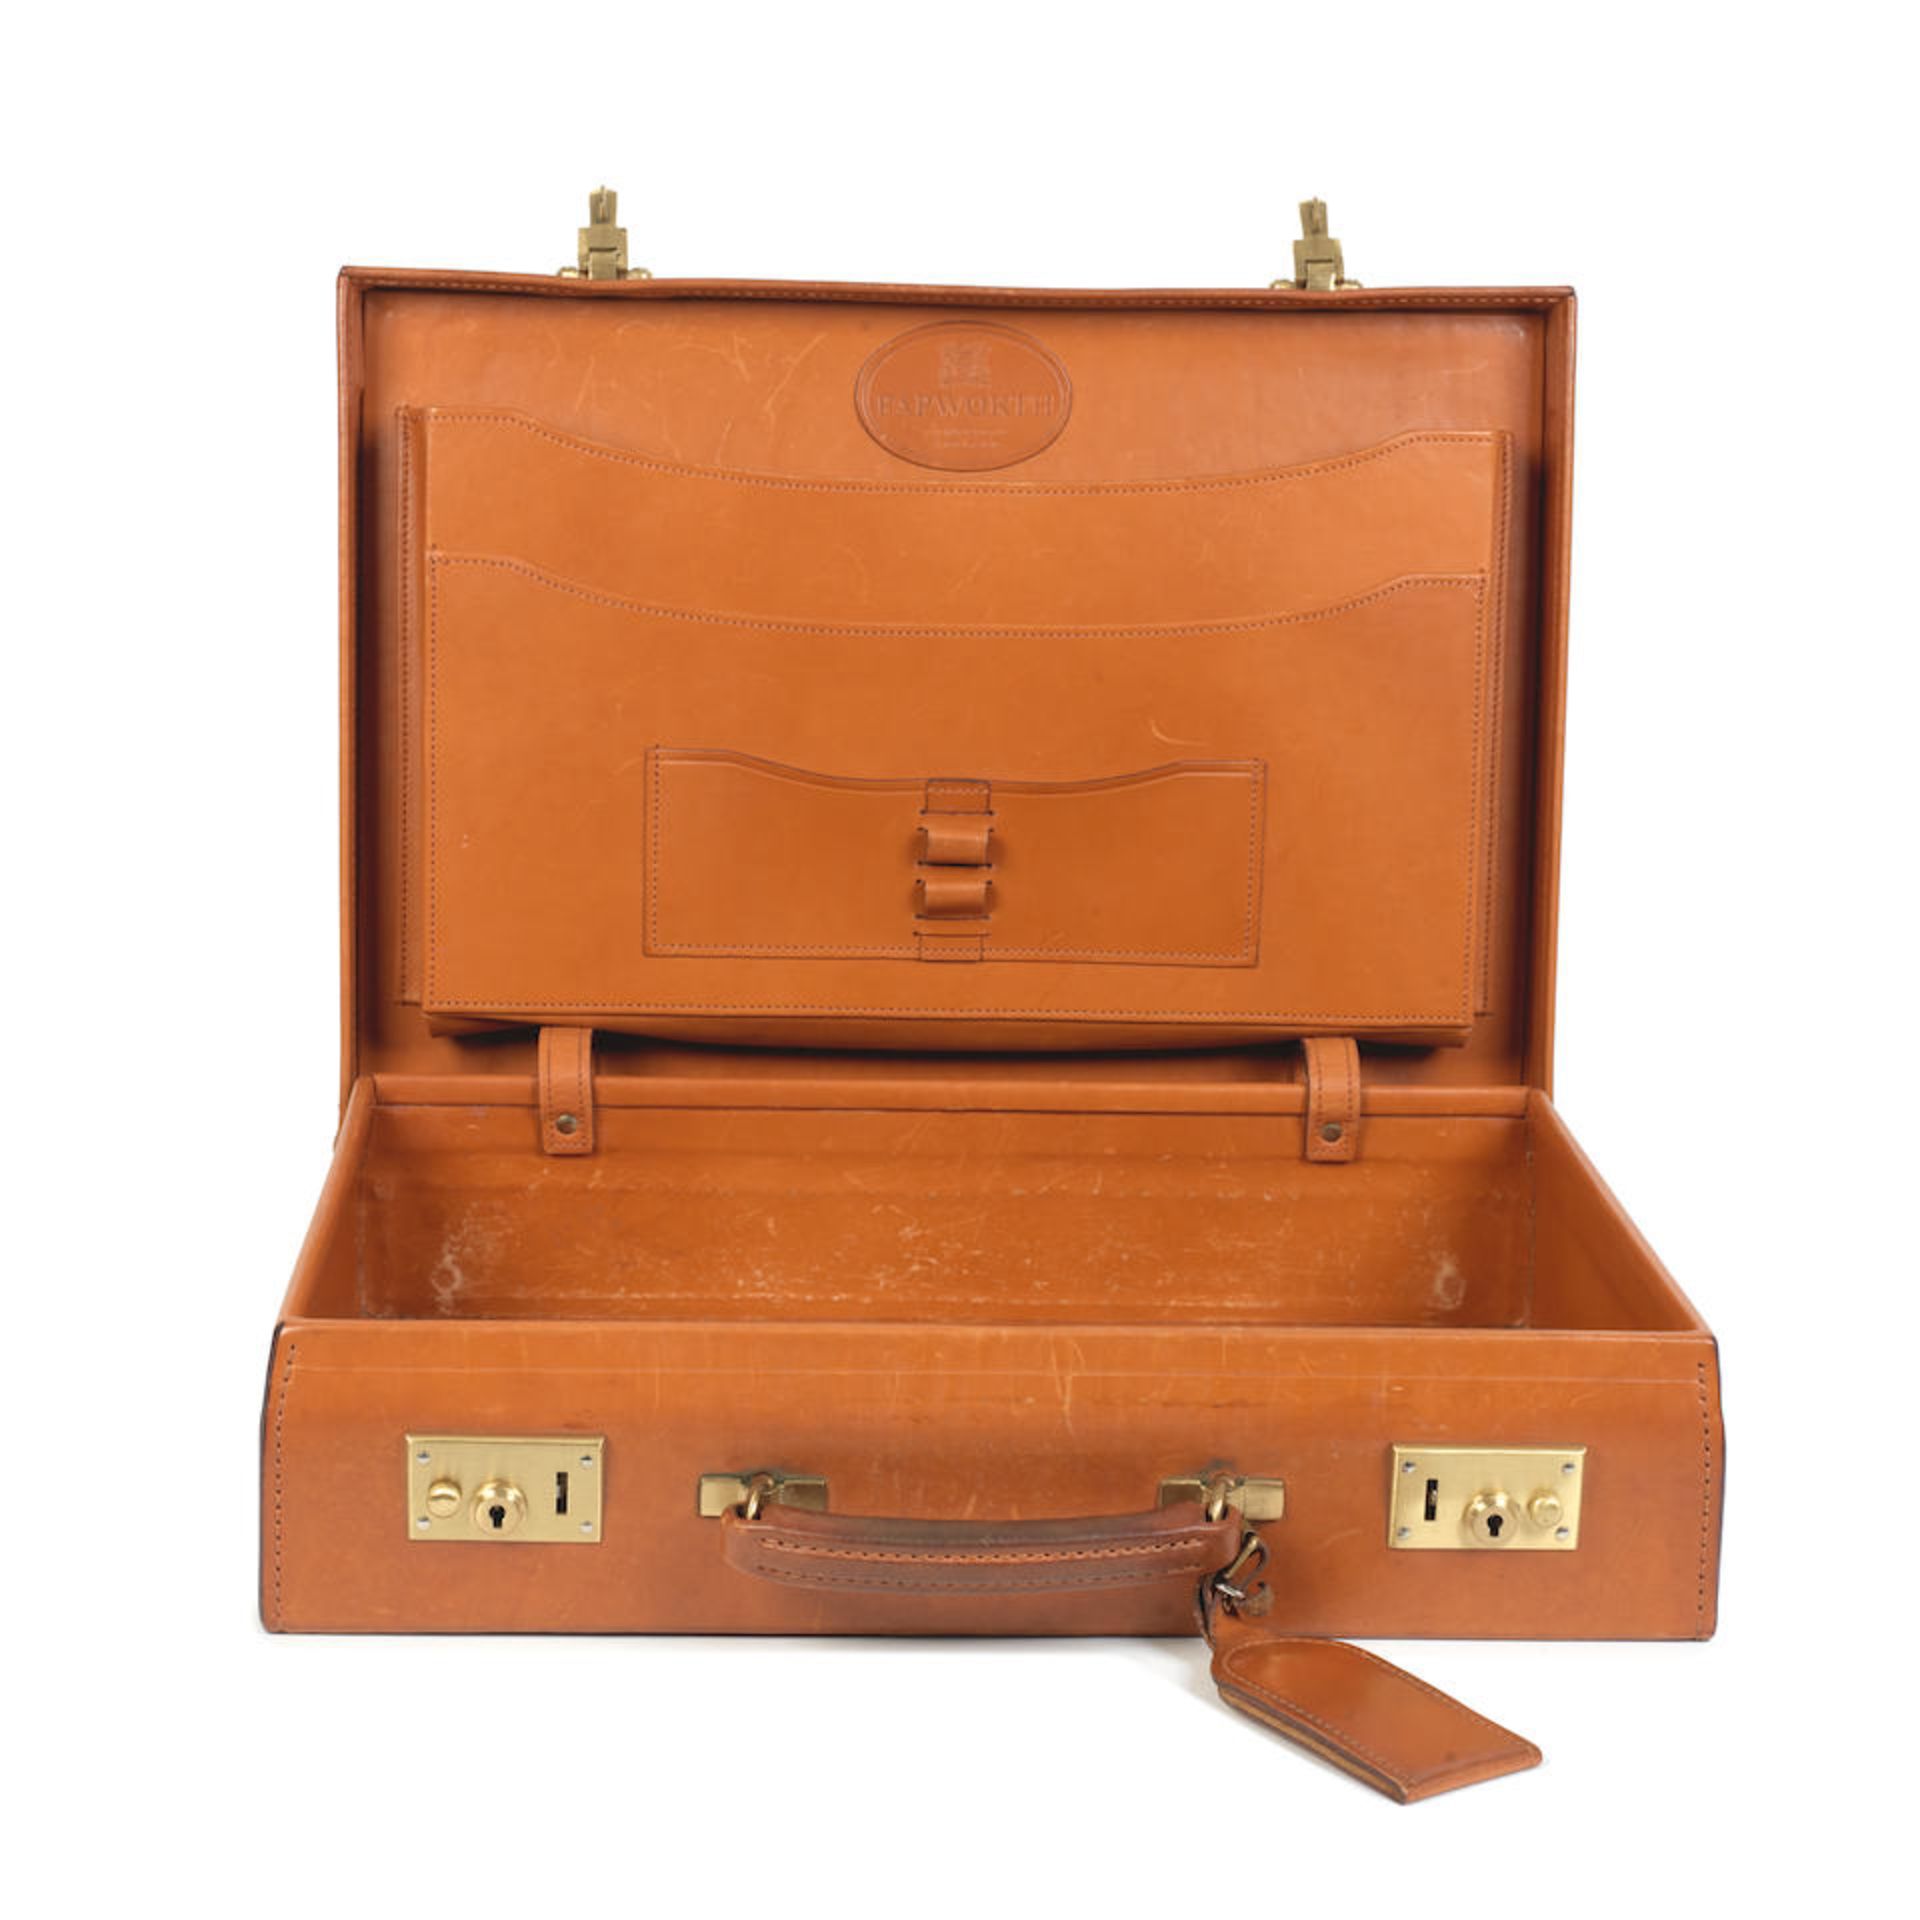 Papworth for Swain Adney Brigg: a Tan Bridle Leather Attaché Briefcase (includes luggage tag) - Image 2 of 2